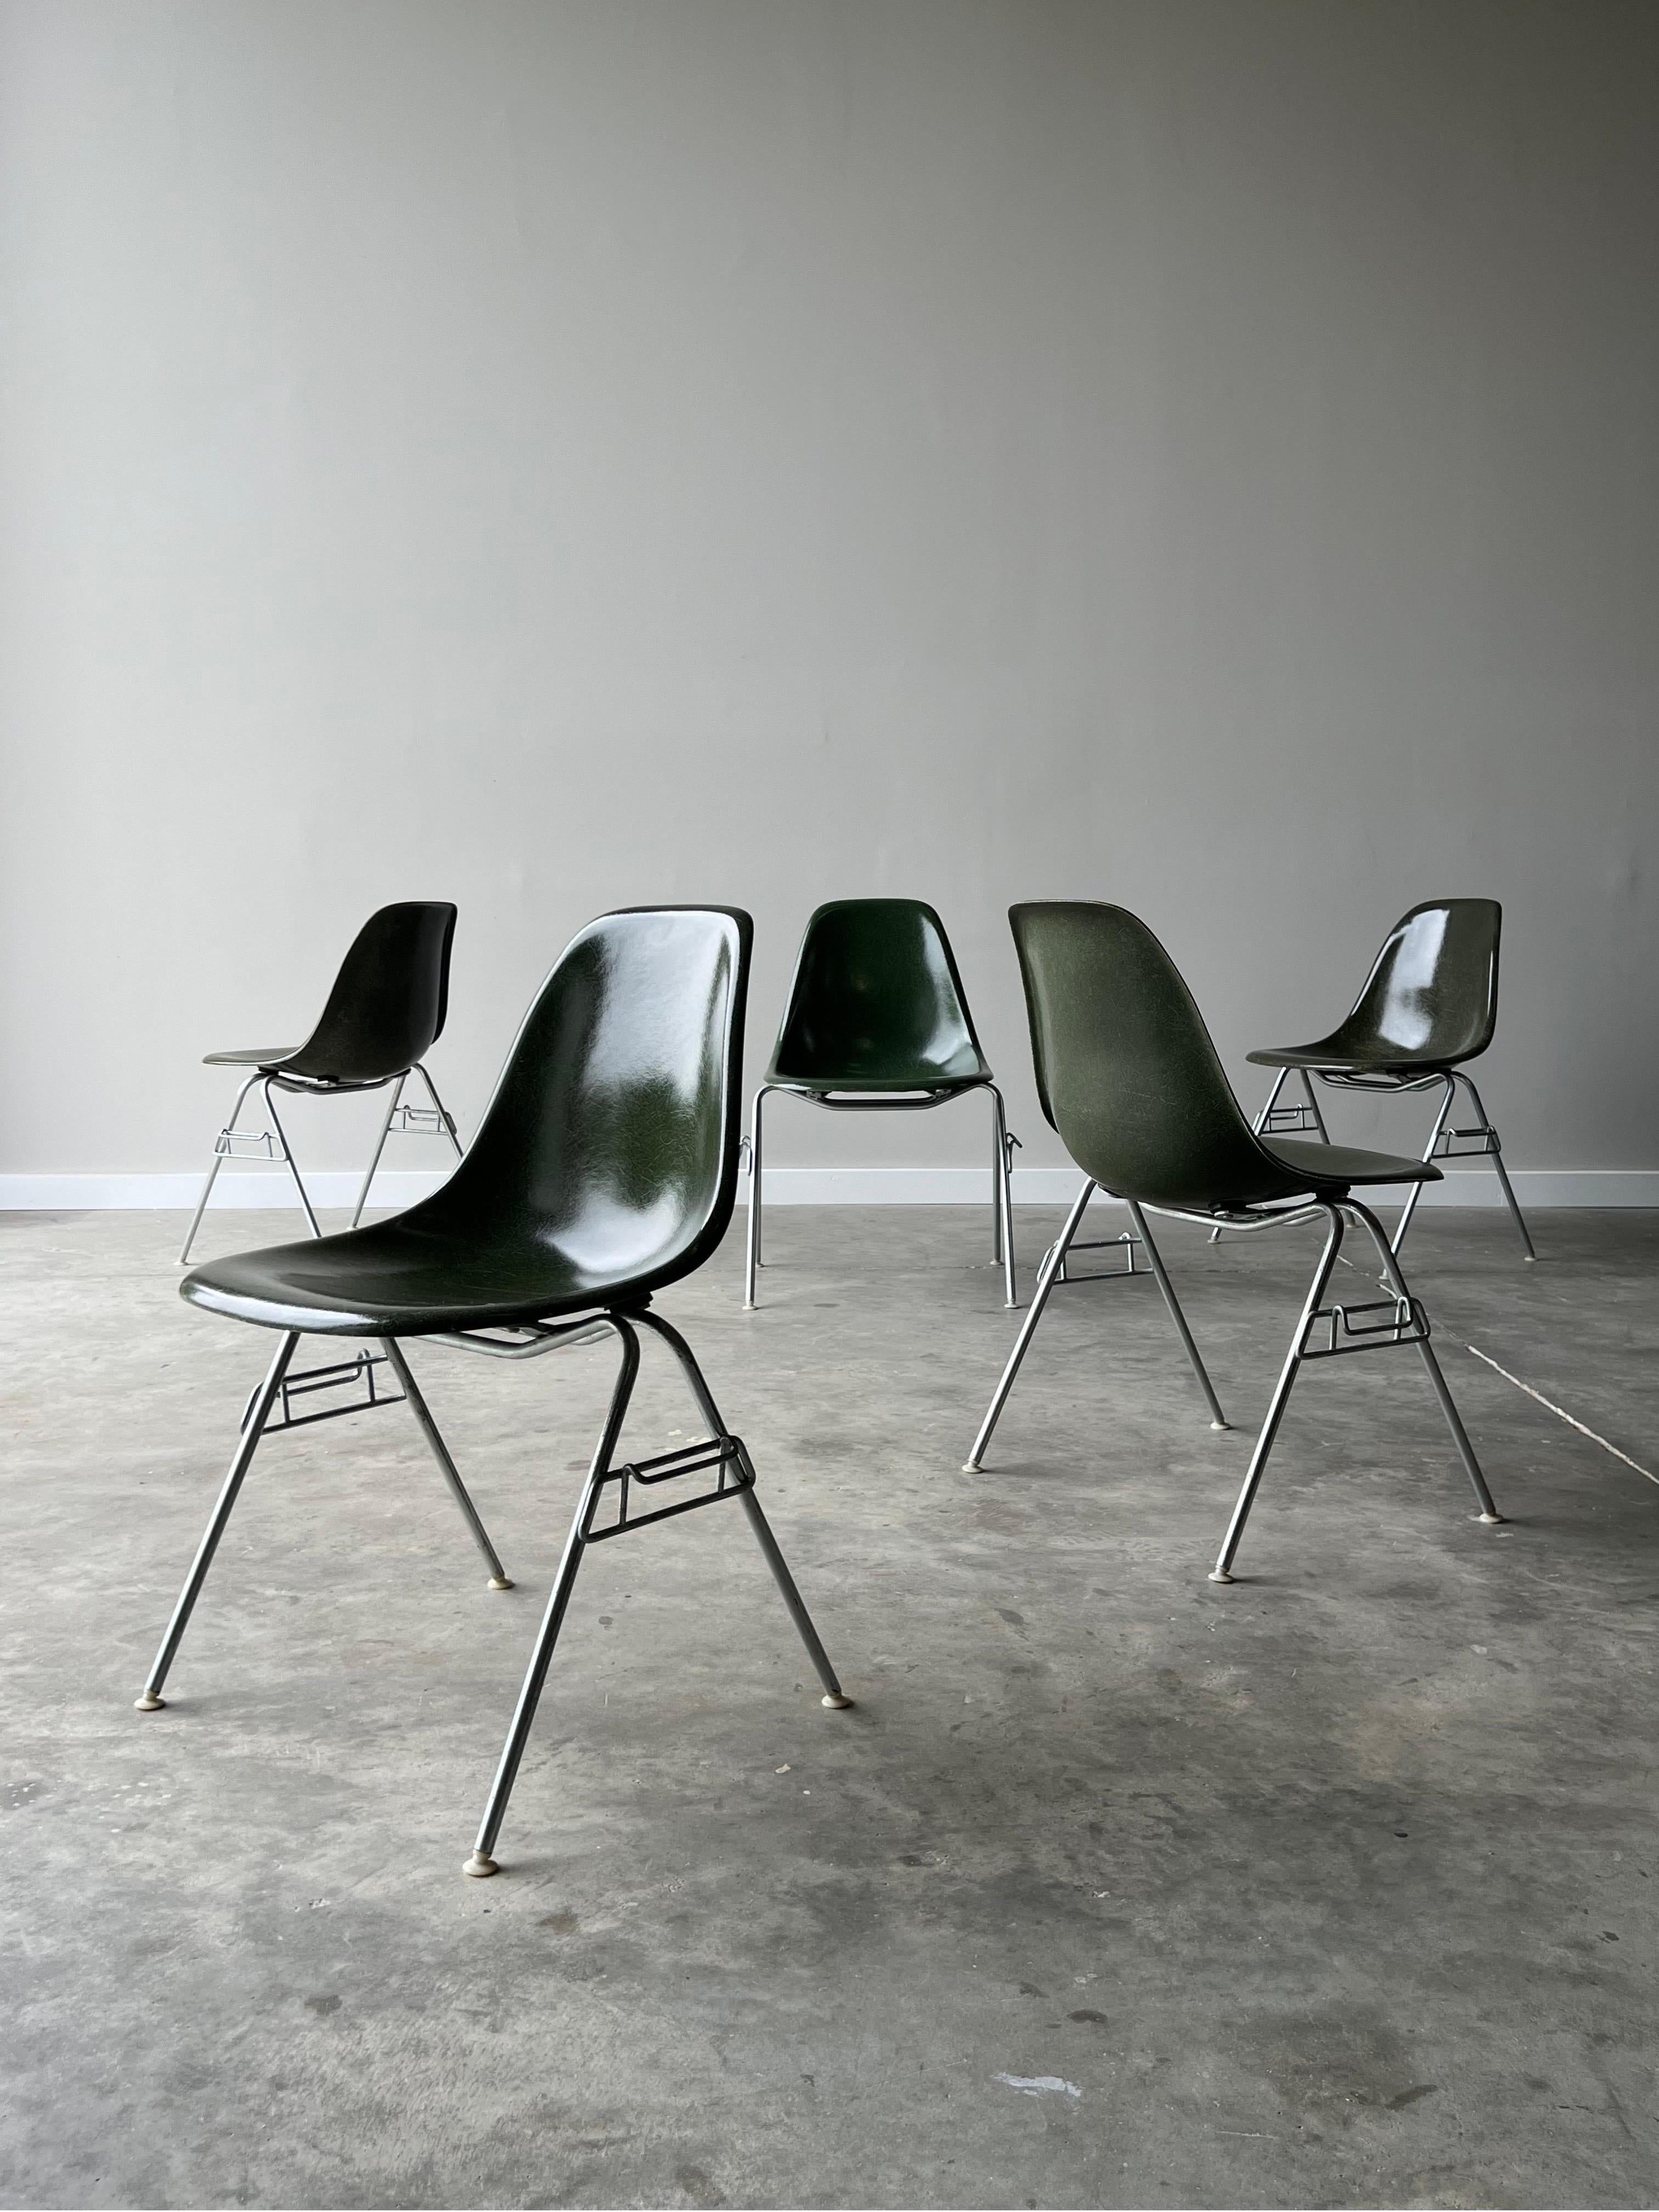 A rare and wonderful opportunity to collect, add, or start a collection. There are 46 available and we will continue to edit the amount available when sold. Priced per chair. Classic 1960s vintage Eames fiberglass shell chairs in beautiful and rare